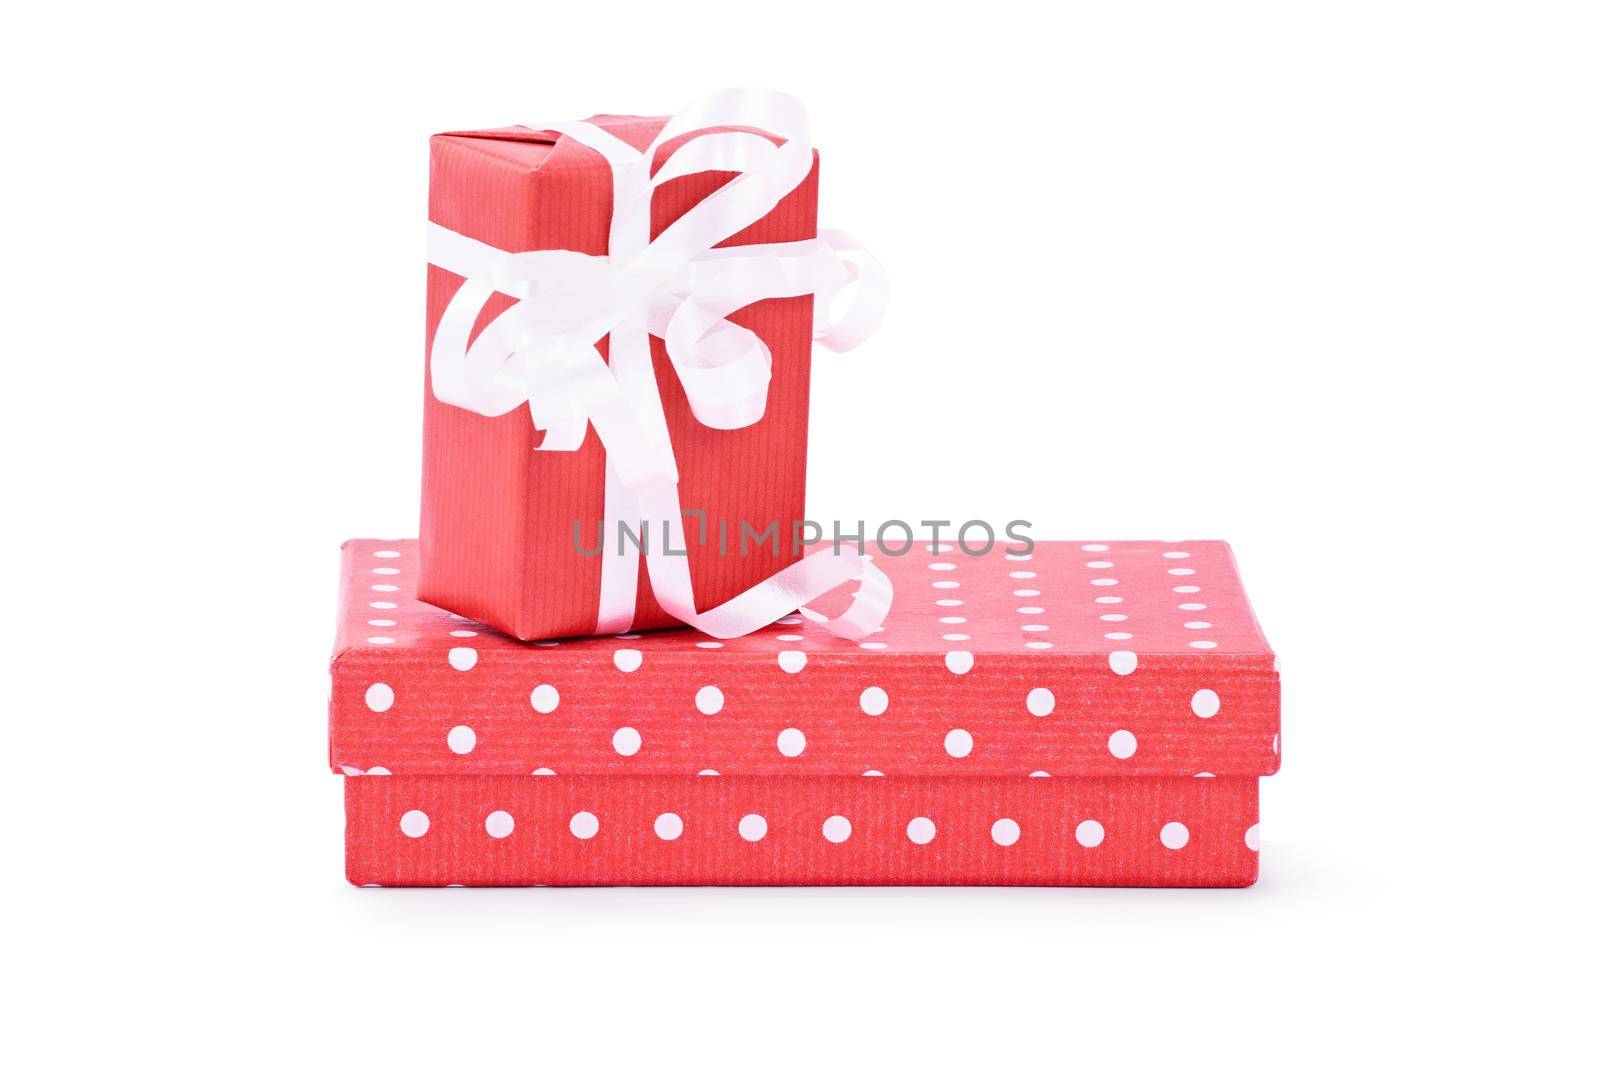 A gift box wrapped in red wrapping paper with white ribbon on top of a red box with polka dots, isolated on white background. Birthday, Christmas, anniversary concept.